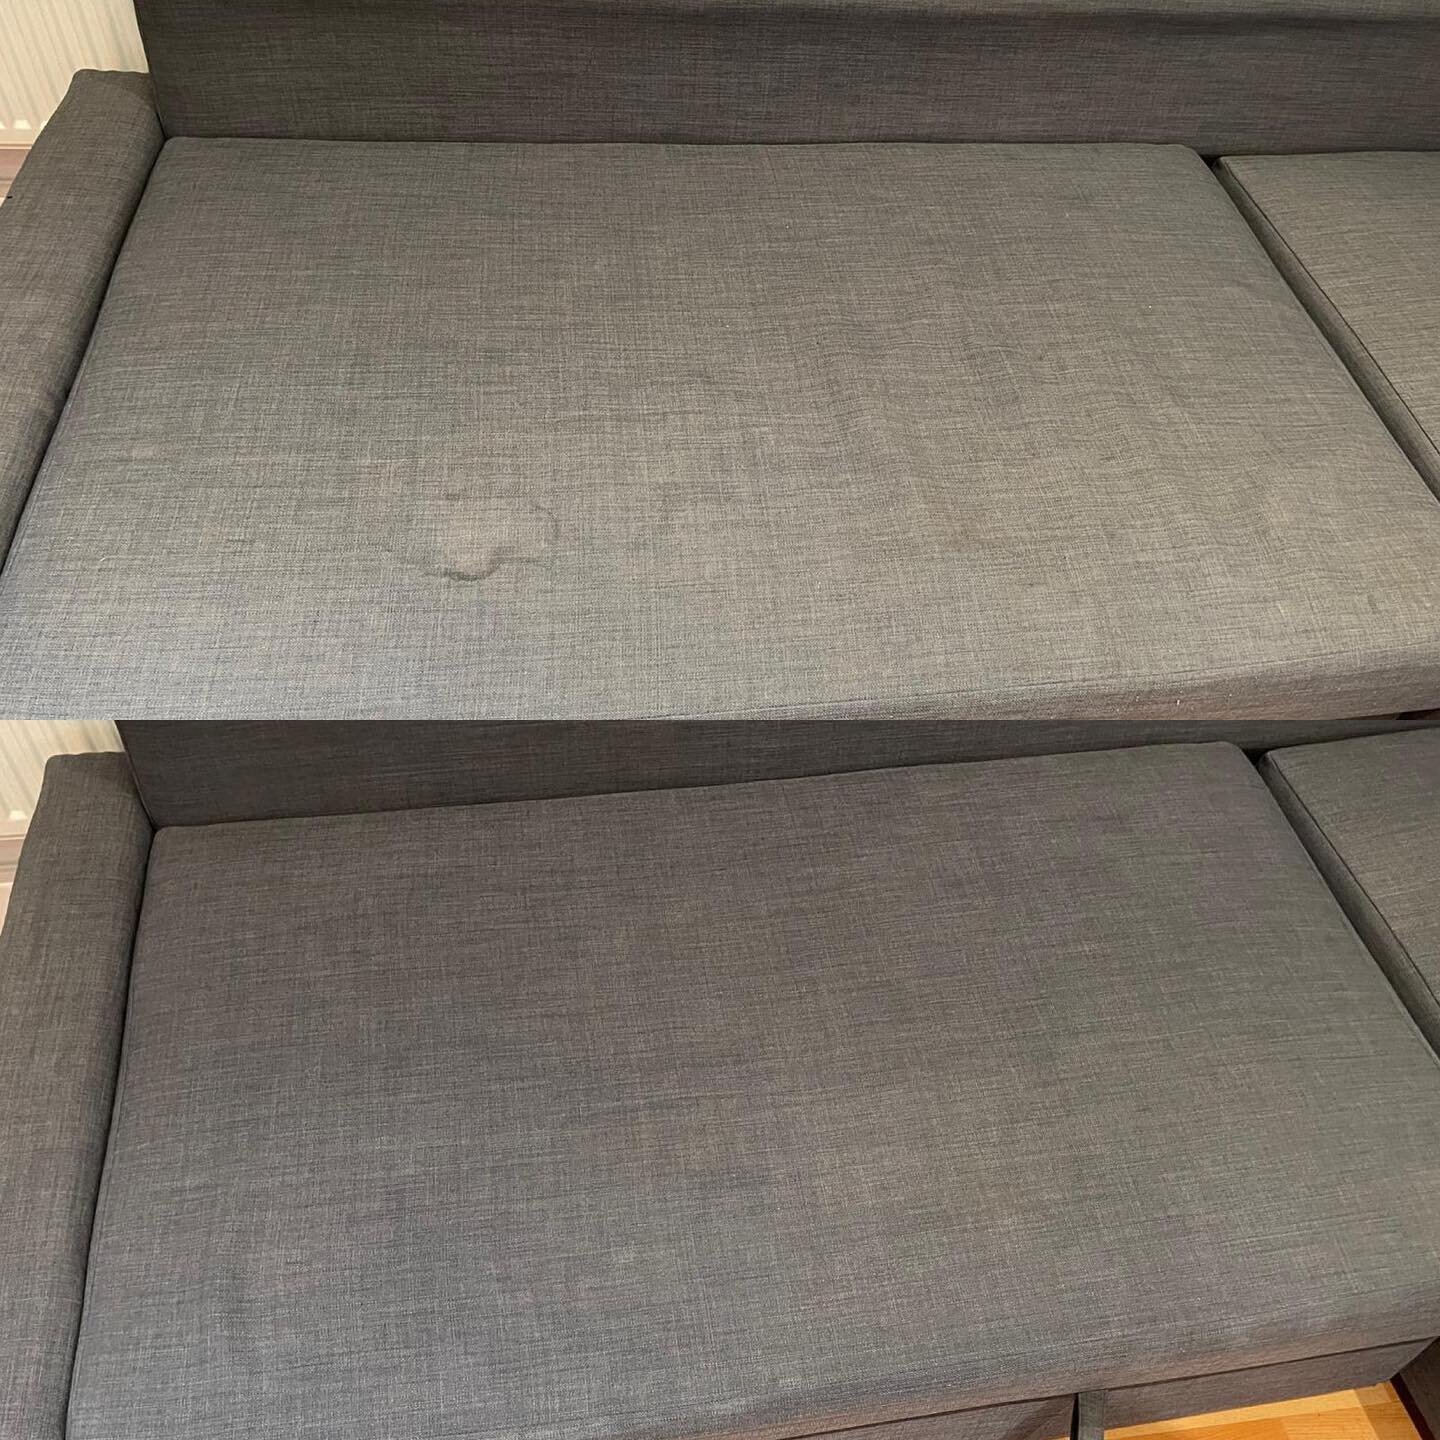 A beautiful before and after photo from this job we had this week! The customer wanted to see if this stain/discolouration would lift from the sofa! I guess these results speak for themselves. 
____________________________________________________
BOO